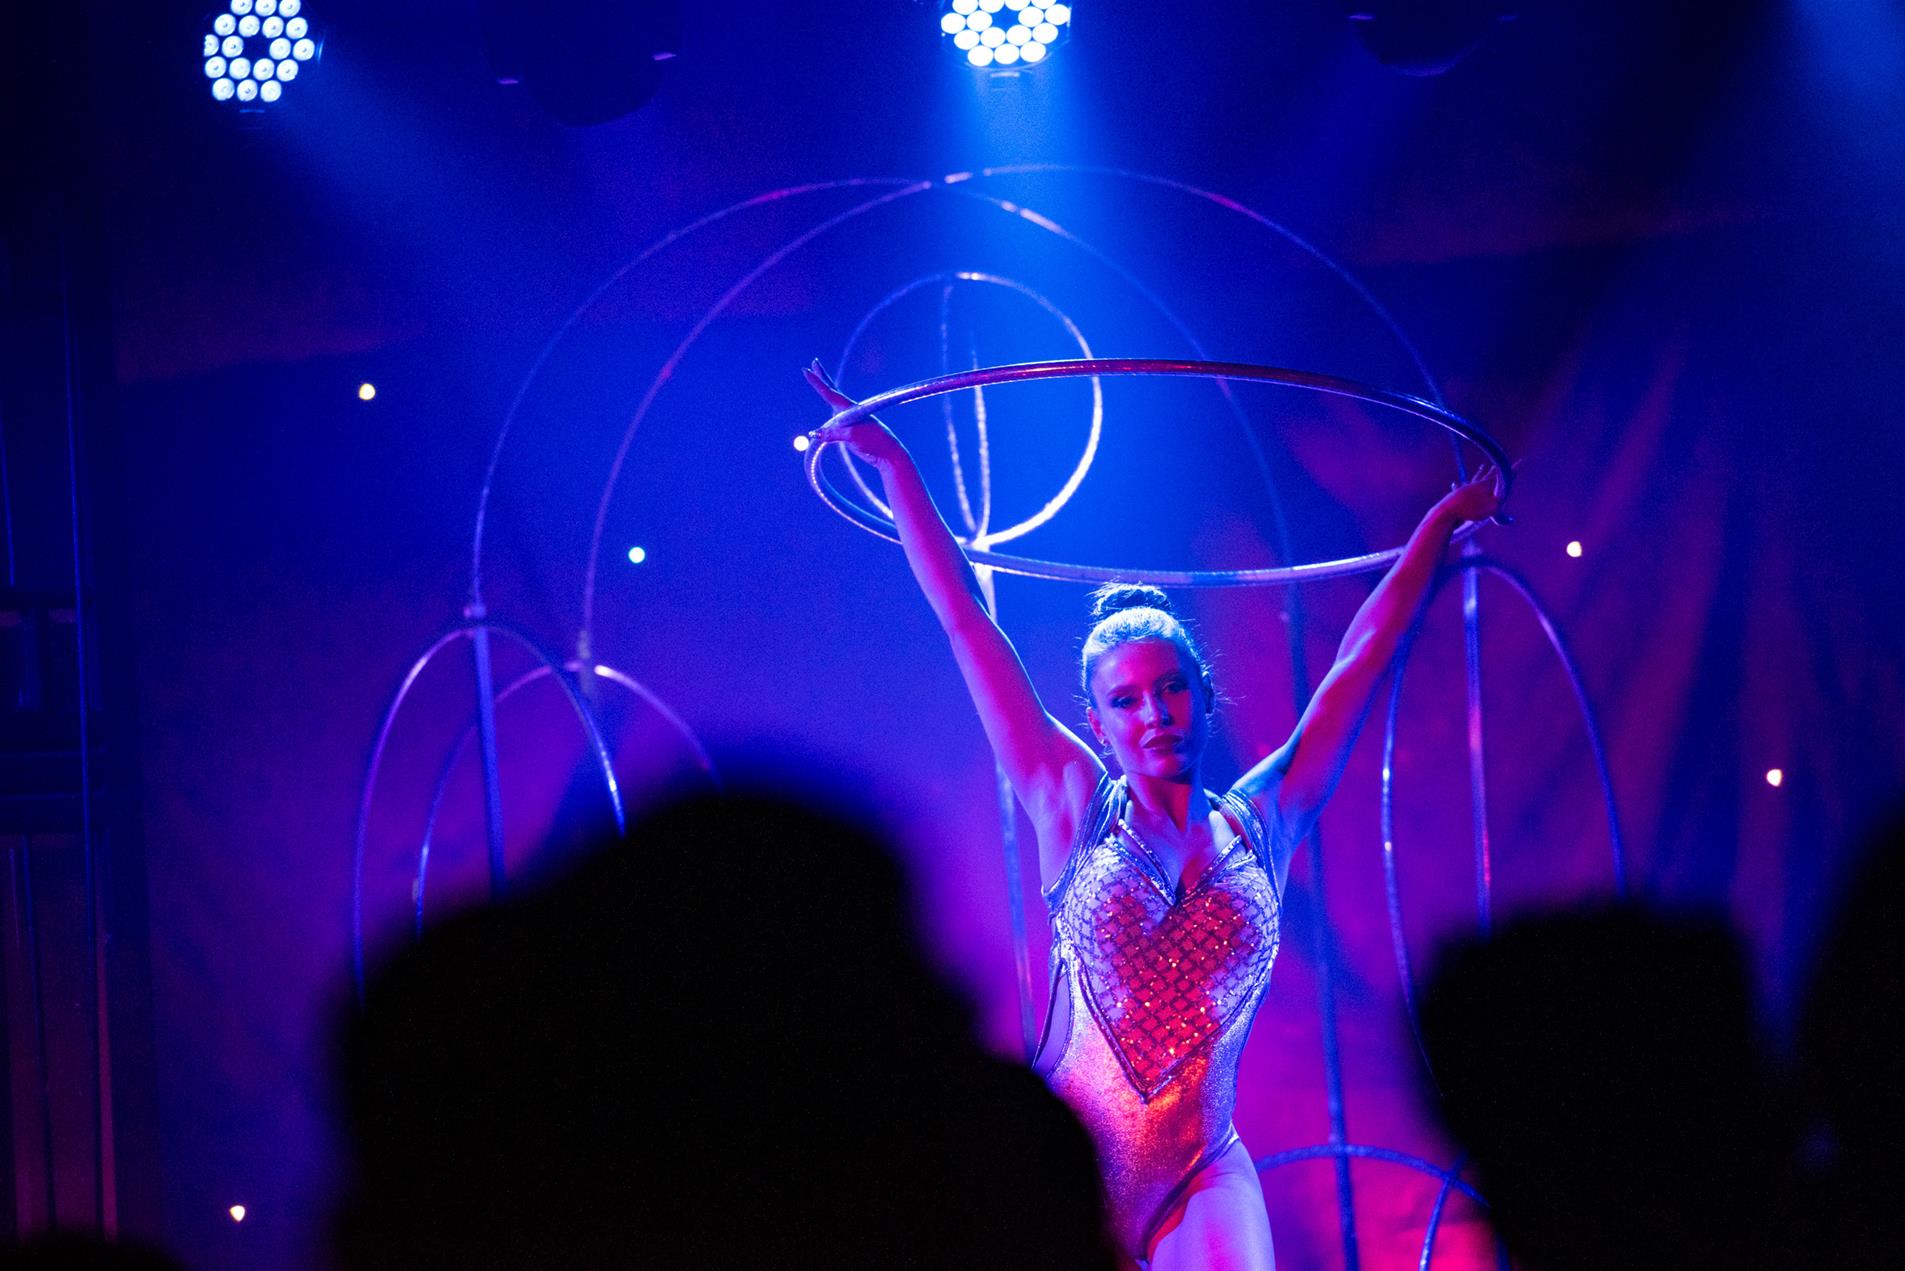 A female performer on stage holding a hoola hoop.